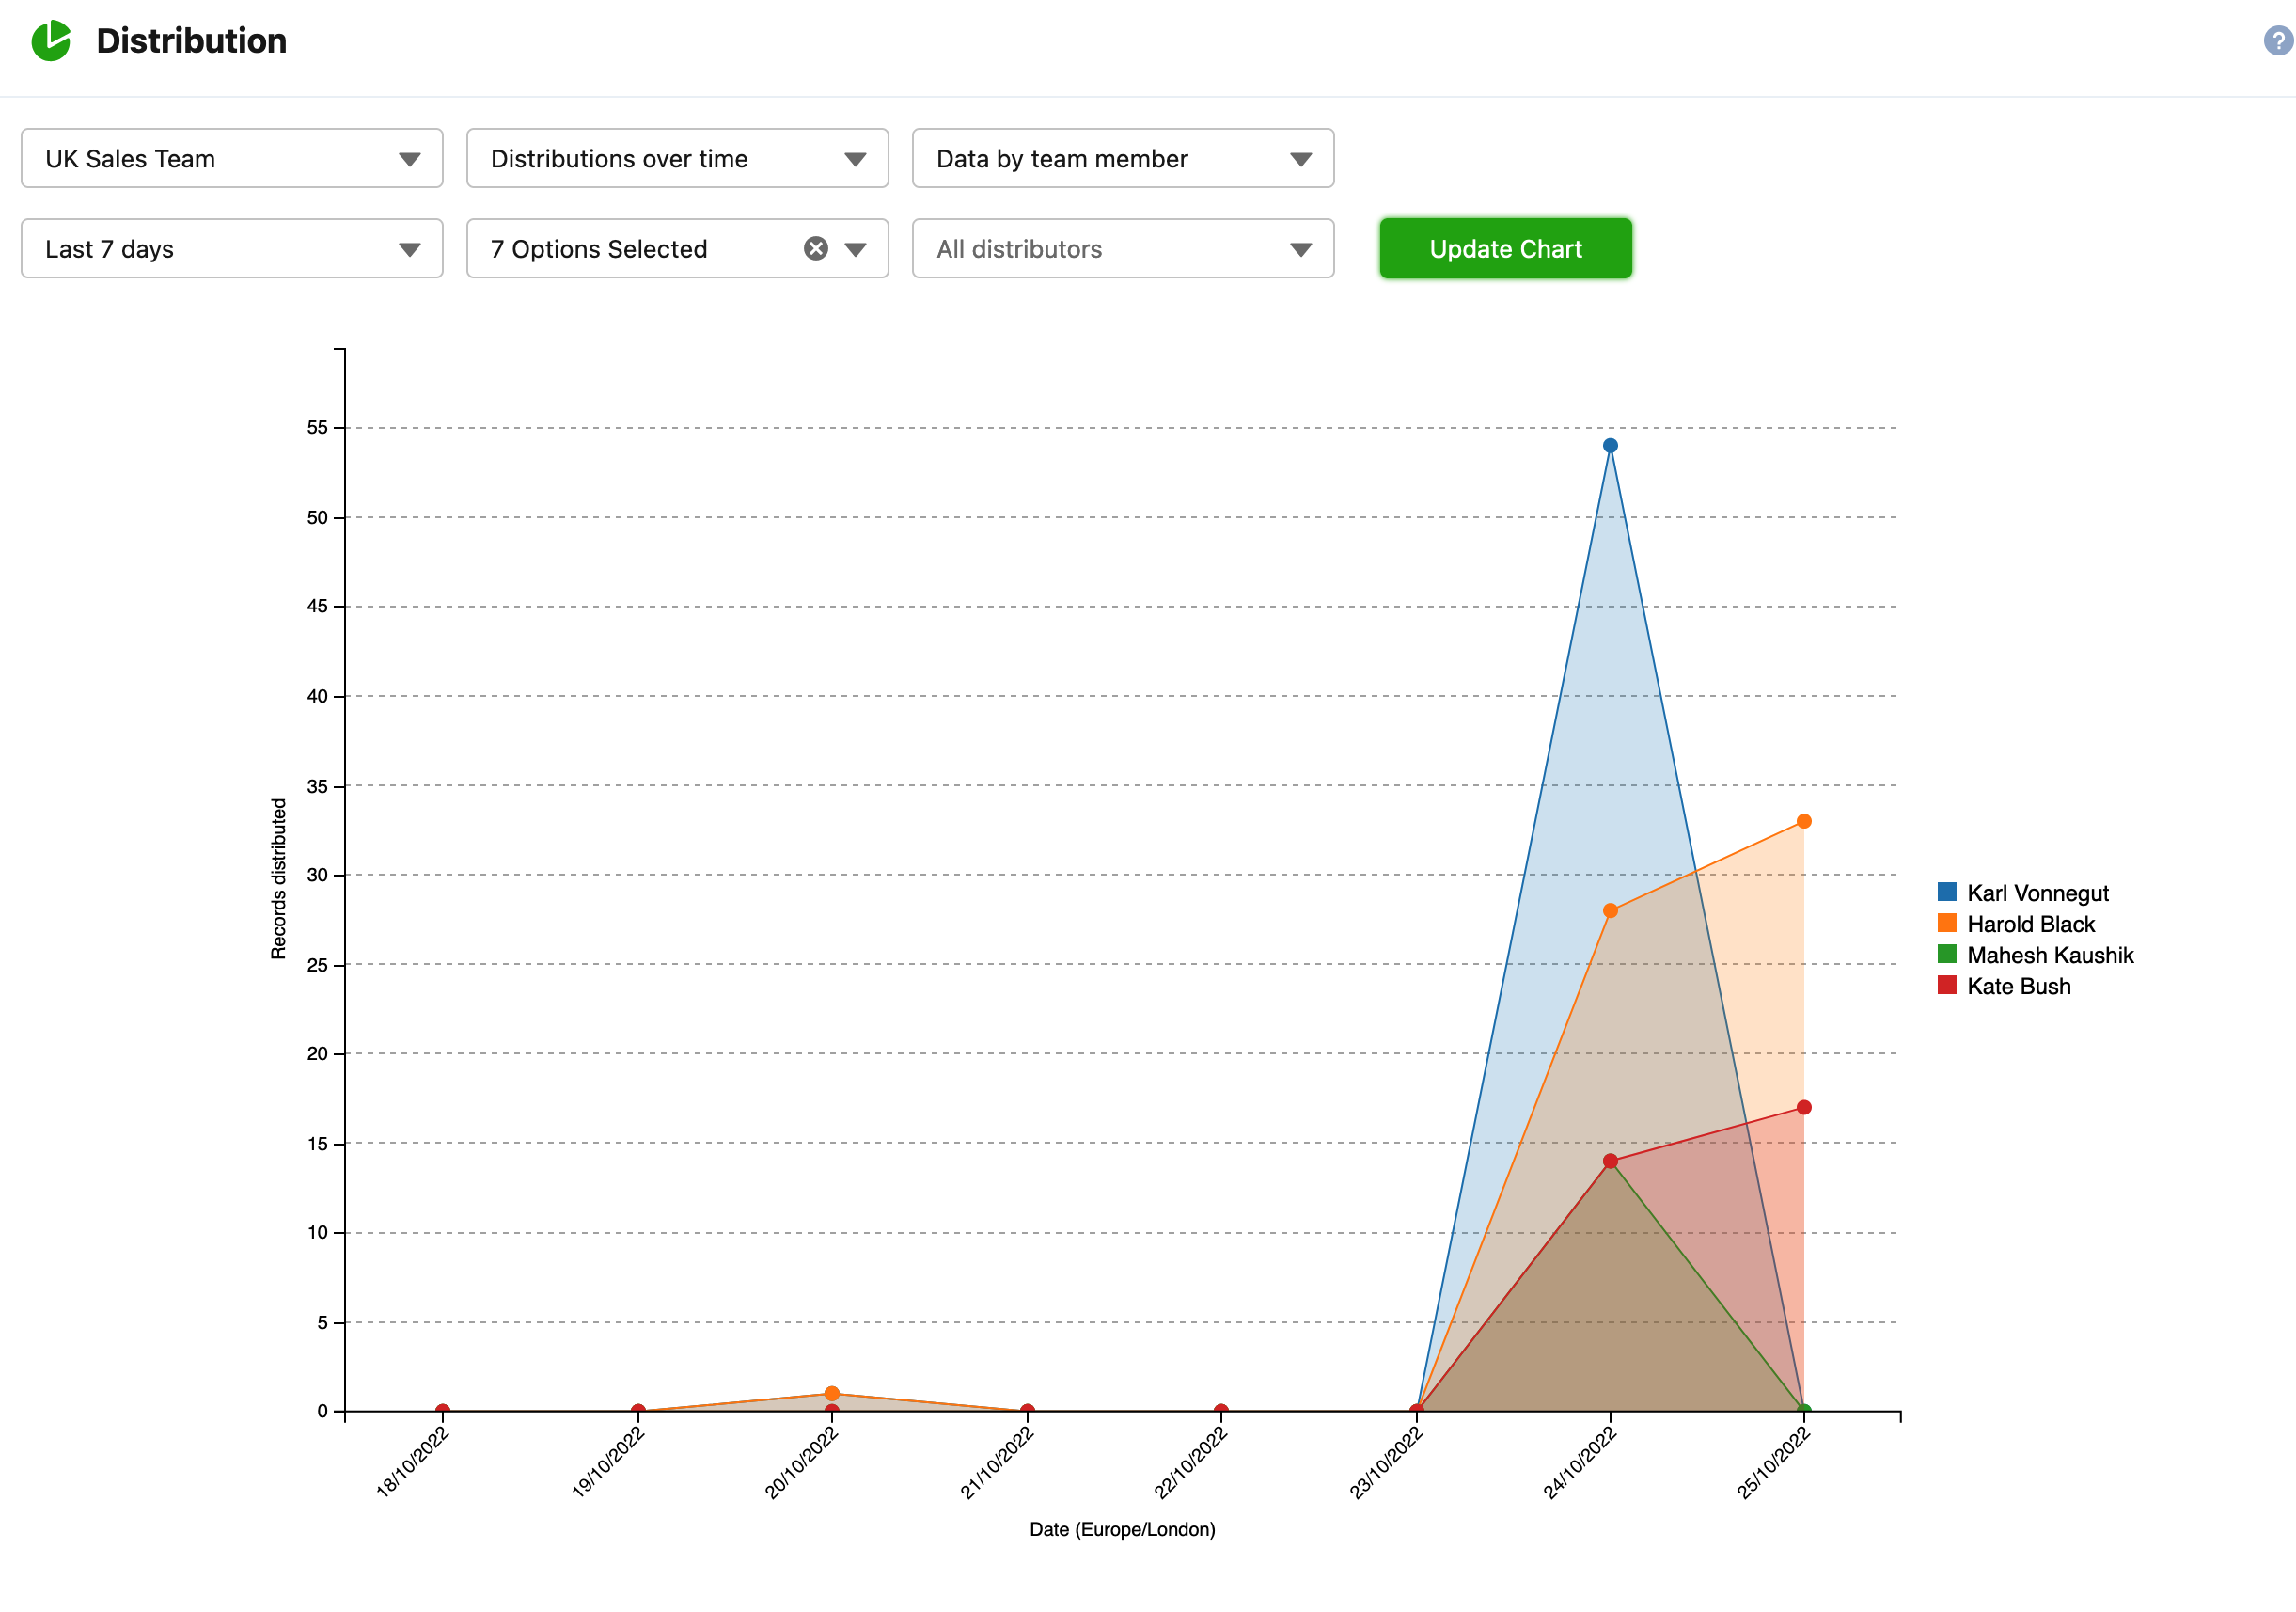 Analytics allow you to see an overview of how Distribution Engine has been performing over a period of time.